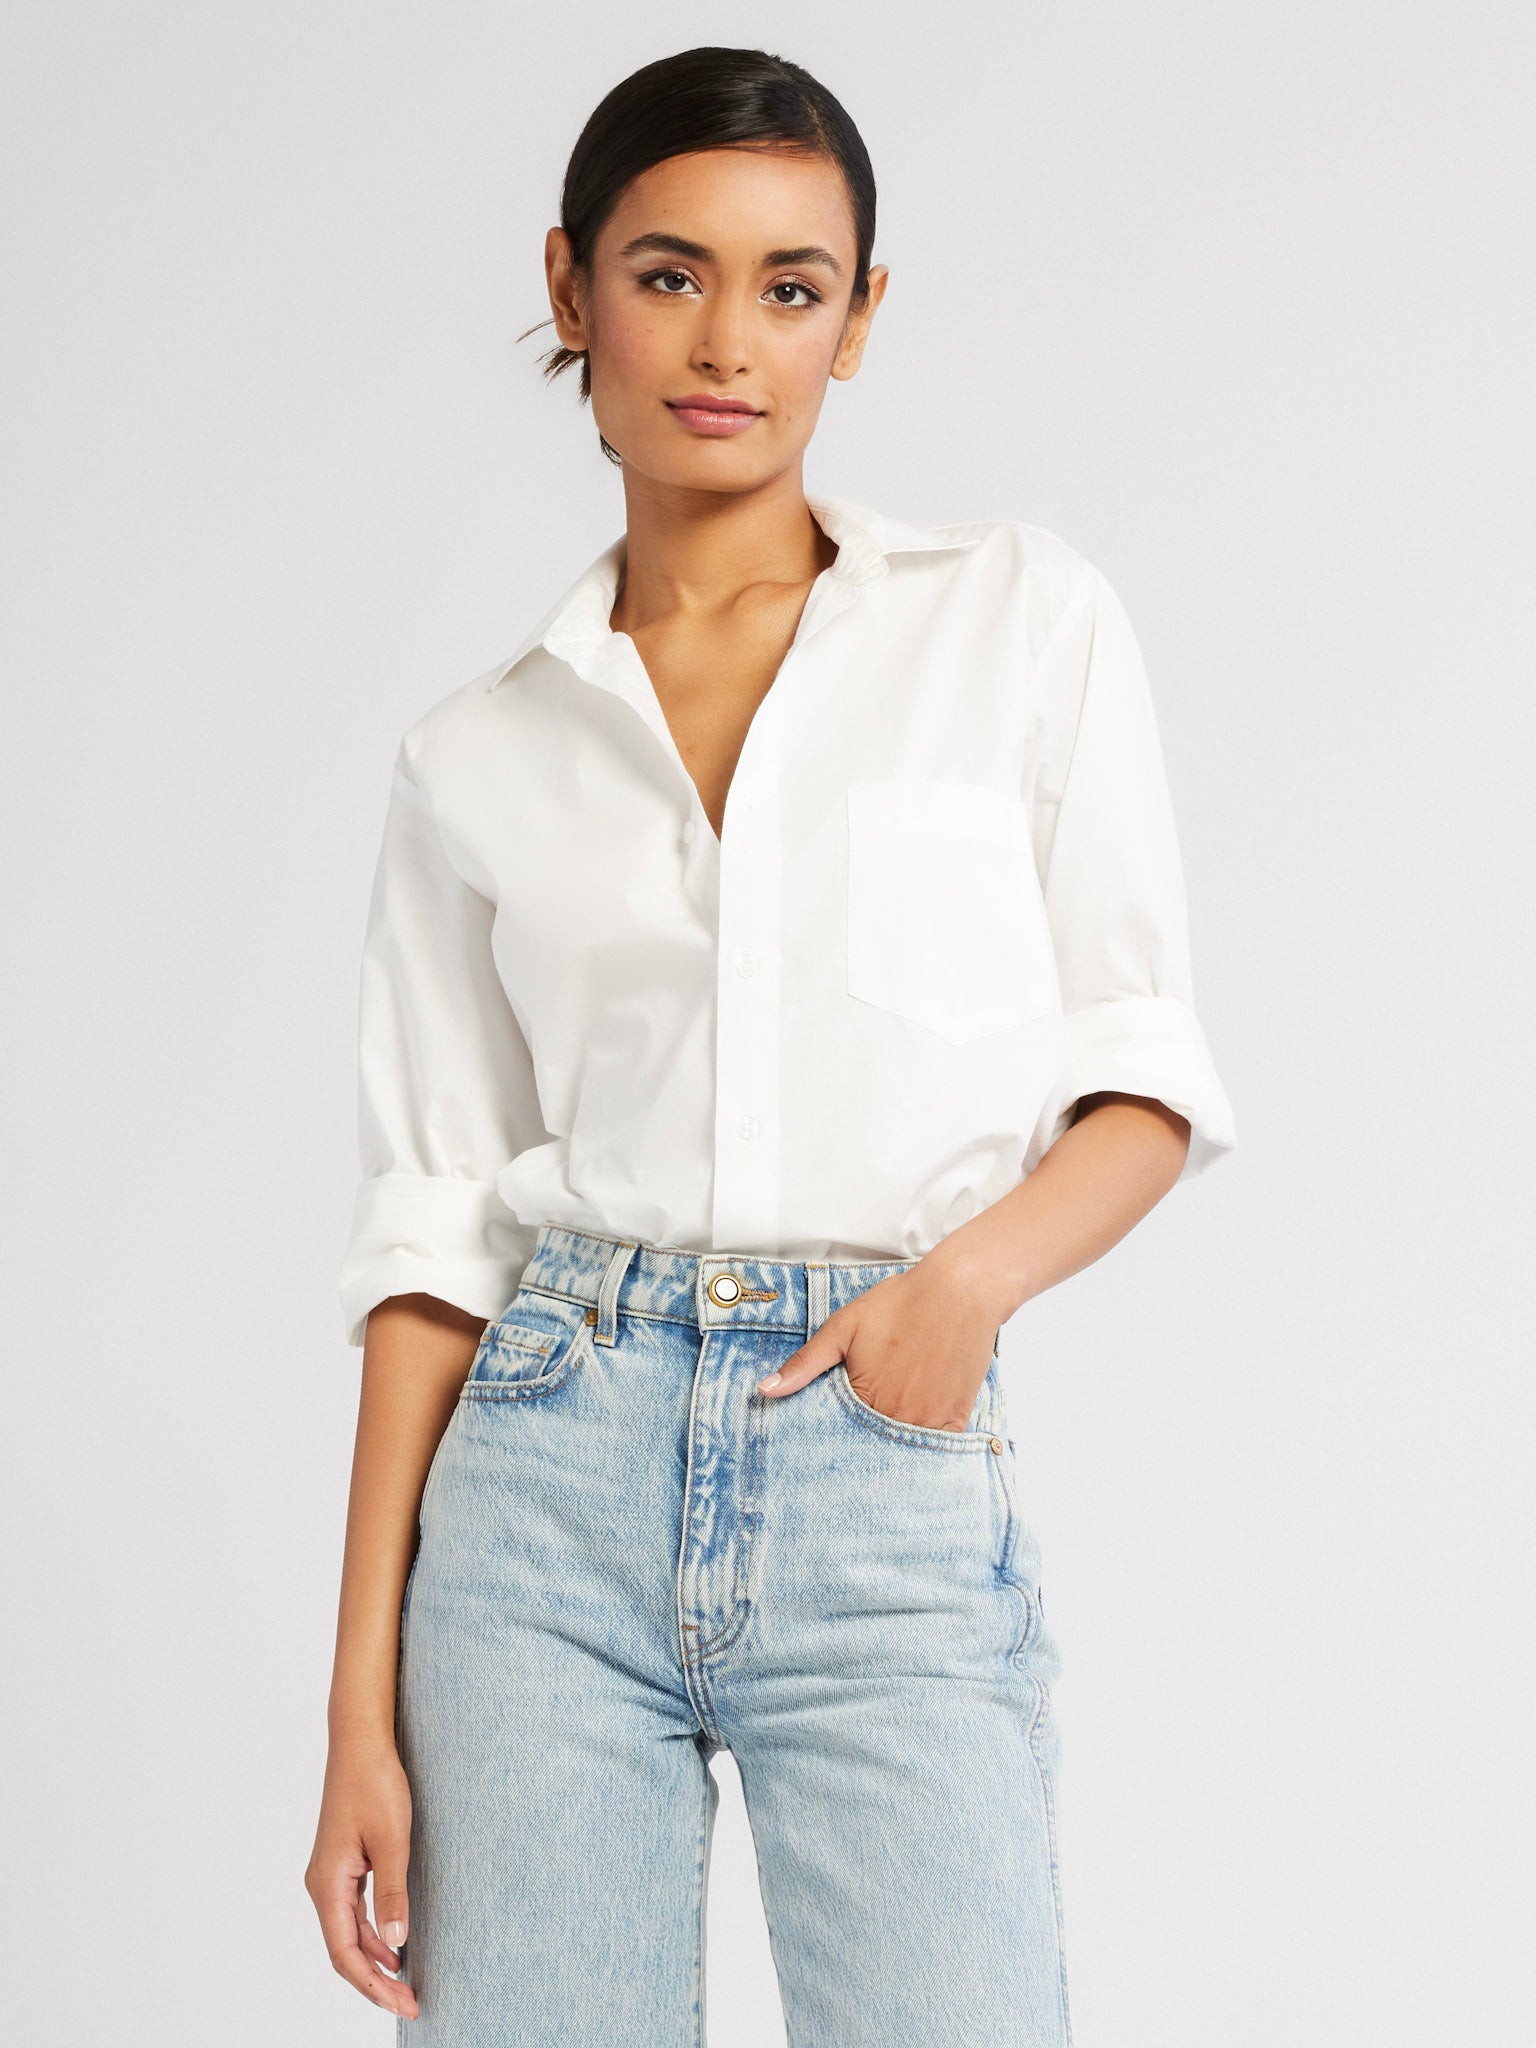 MILLE Clothing Sofia Top in White